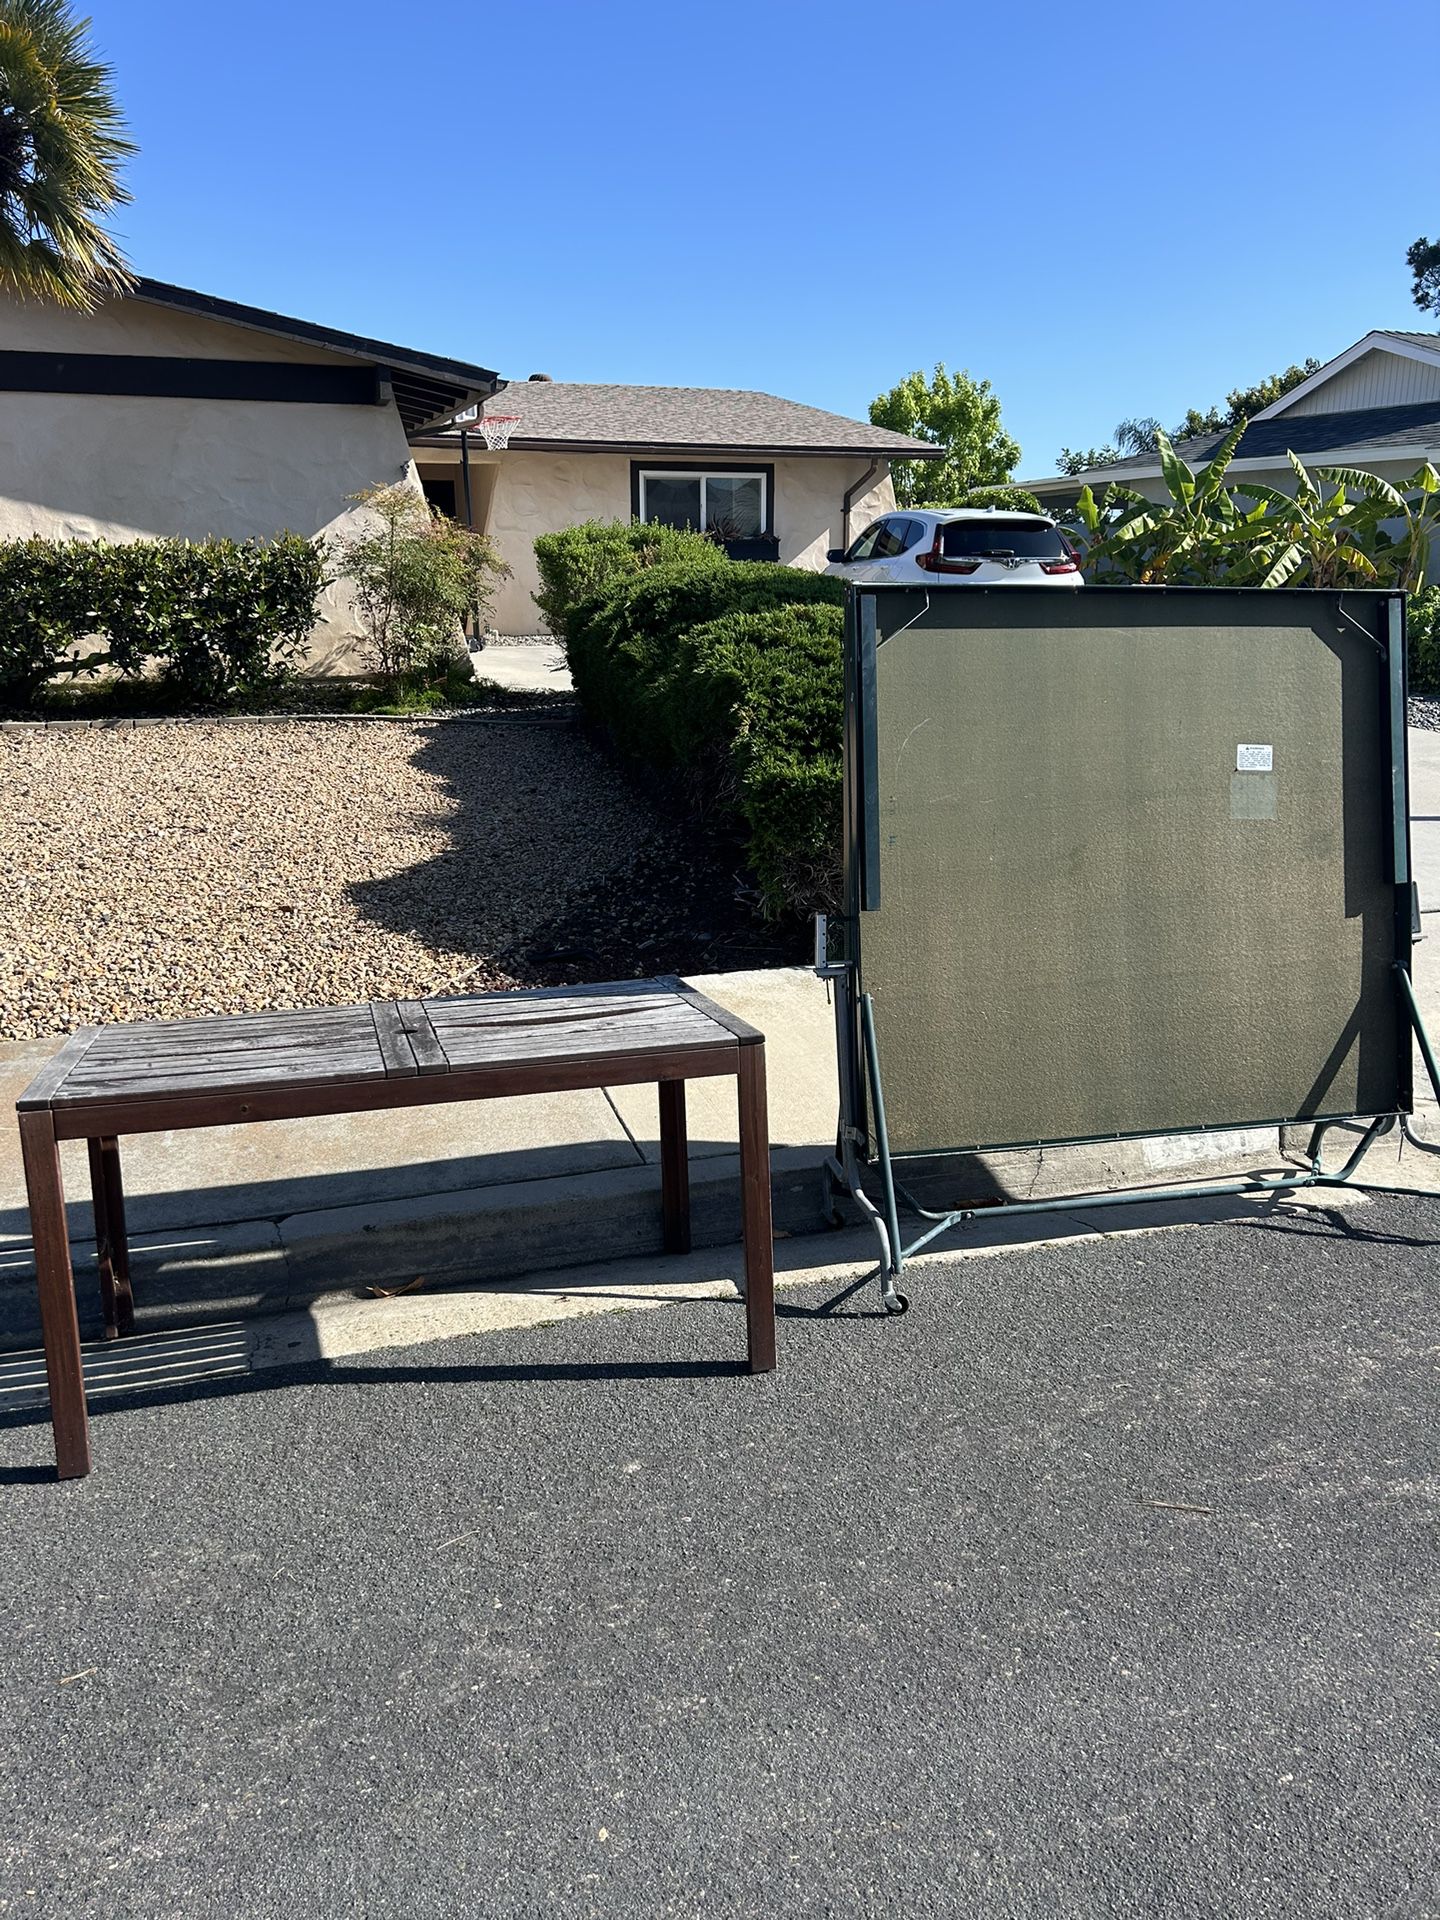 Free Ping Pong Table And Patio Table